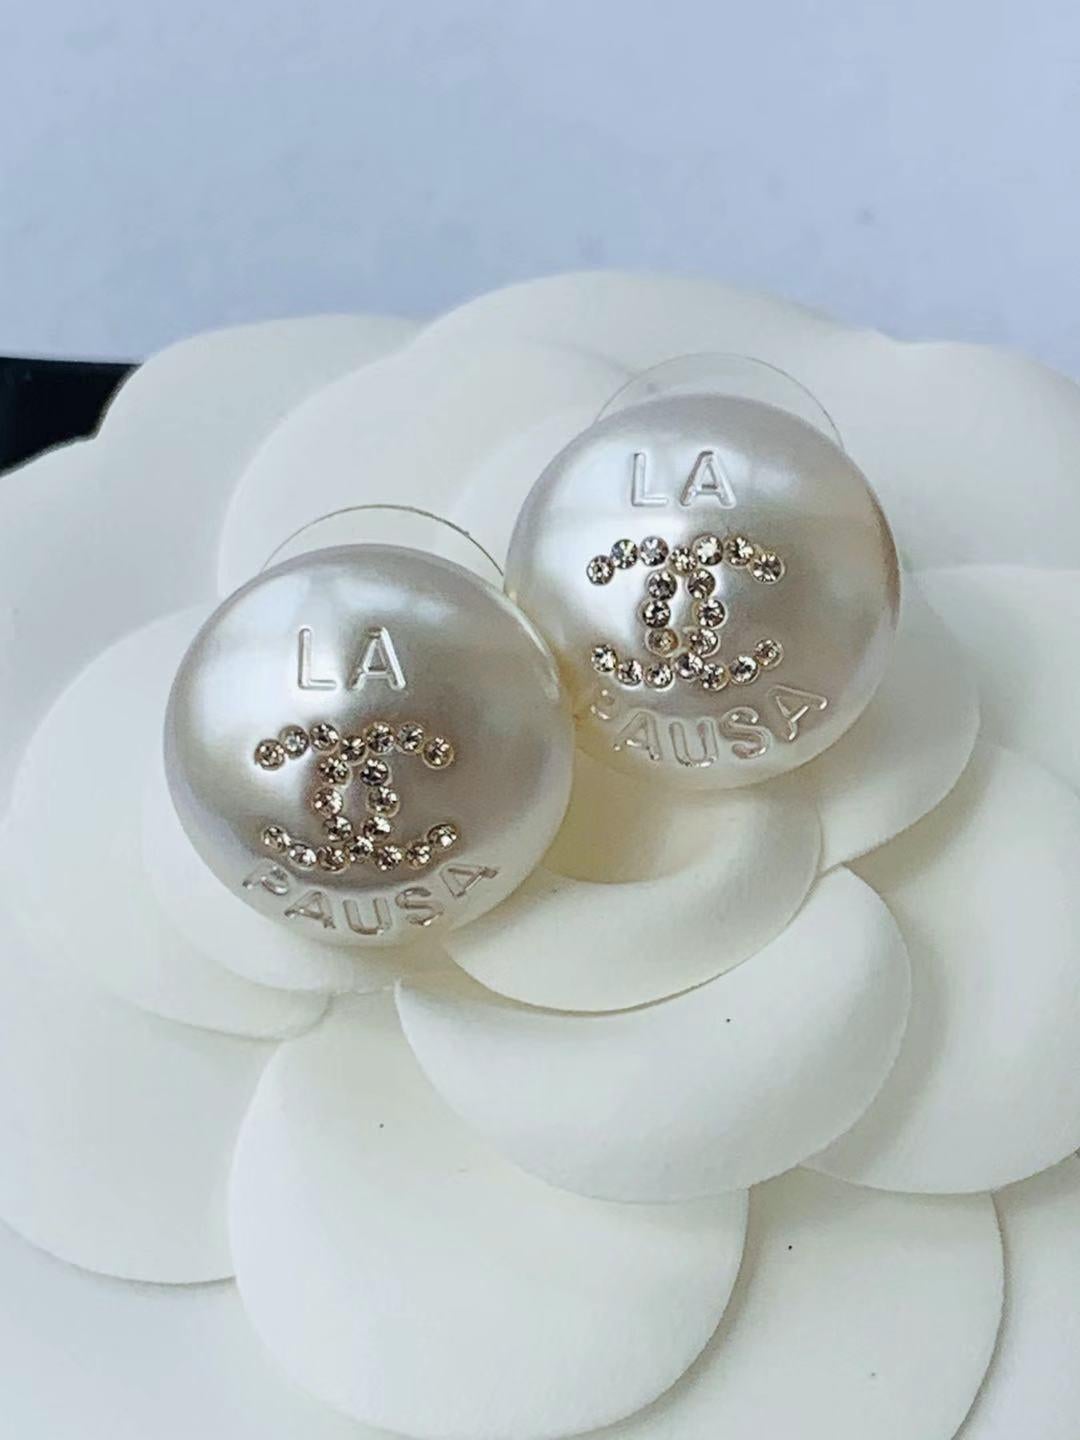 They say diamonds are a girl's best friend but we believe pearls do the trick just as well. Adorned with a signature CC logo and faux-pearl crystal detailing, these ear studs from Chanel Pre-Owned are the ones you'll never want to take off. BFFs,